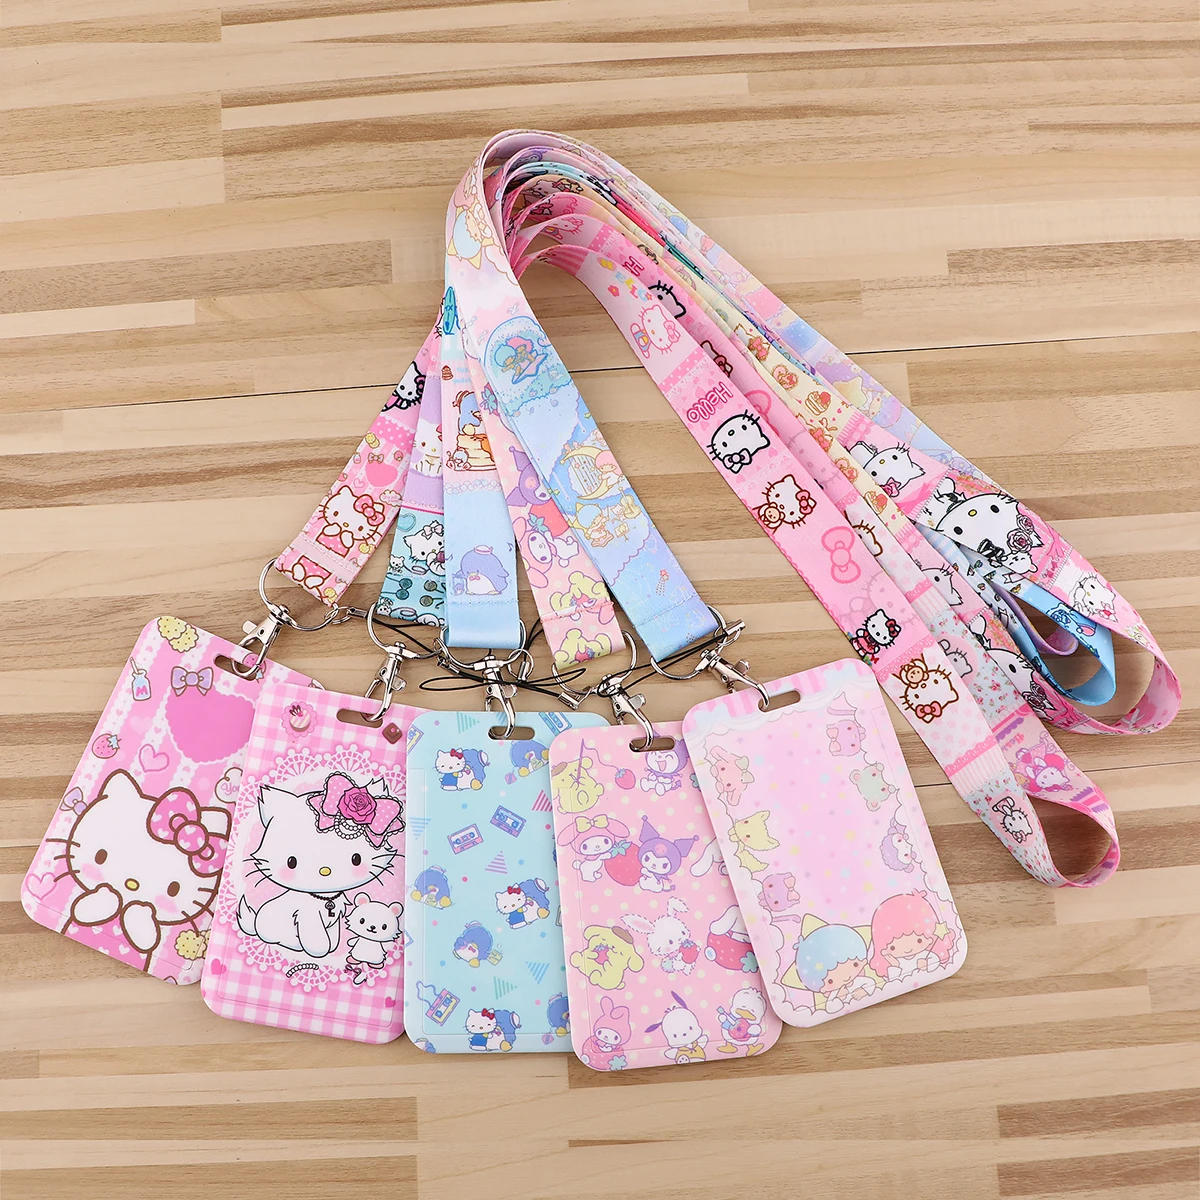 Rabbit Keychain Kawaii Cat Cartoon Anime Lanyards for Key ID Card Gym Cell Phone Strap USB Badge Holder Accessories Gift fashion creative lanyards keychain mobile phone strap id badge holder rope key chain keyrings cosplay accessory gifts 1pc